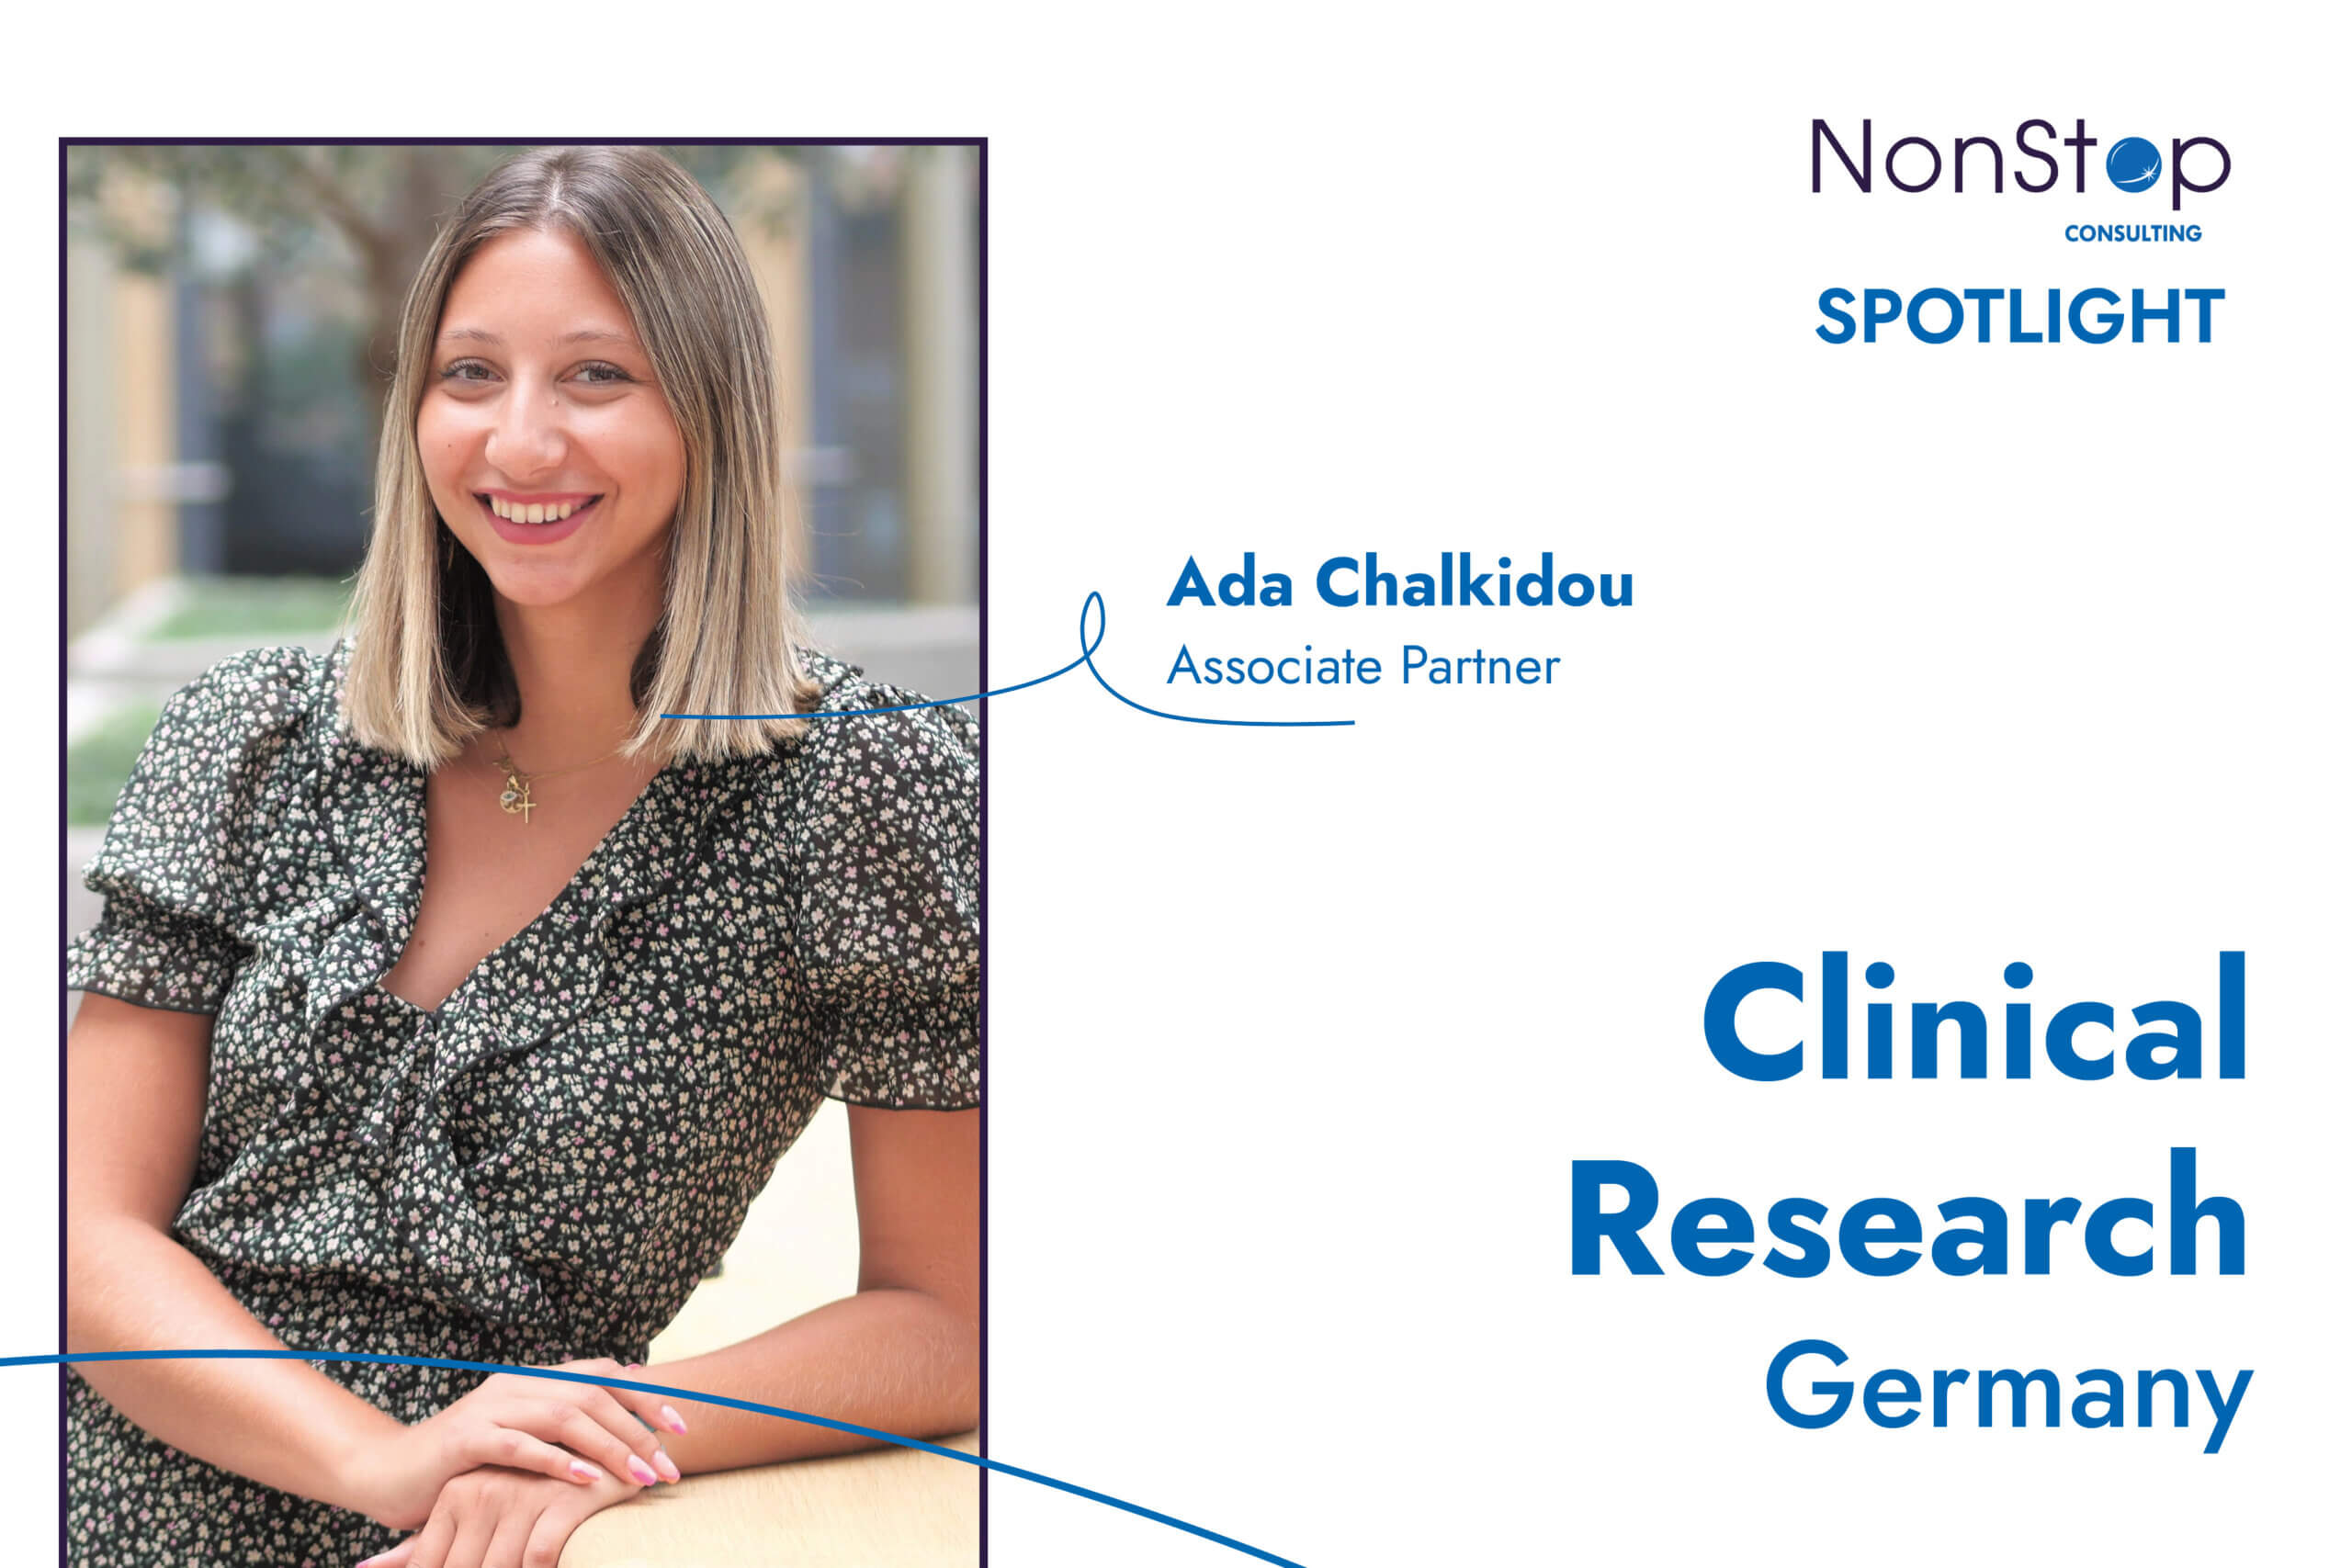 Associate Partner Ada Chalkidou gives an overview of German clinical research recruitment in this edition of our Spotlight series.